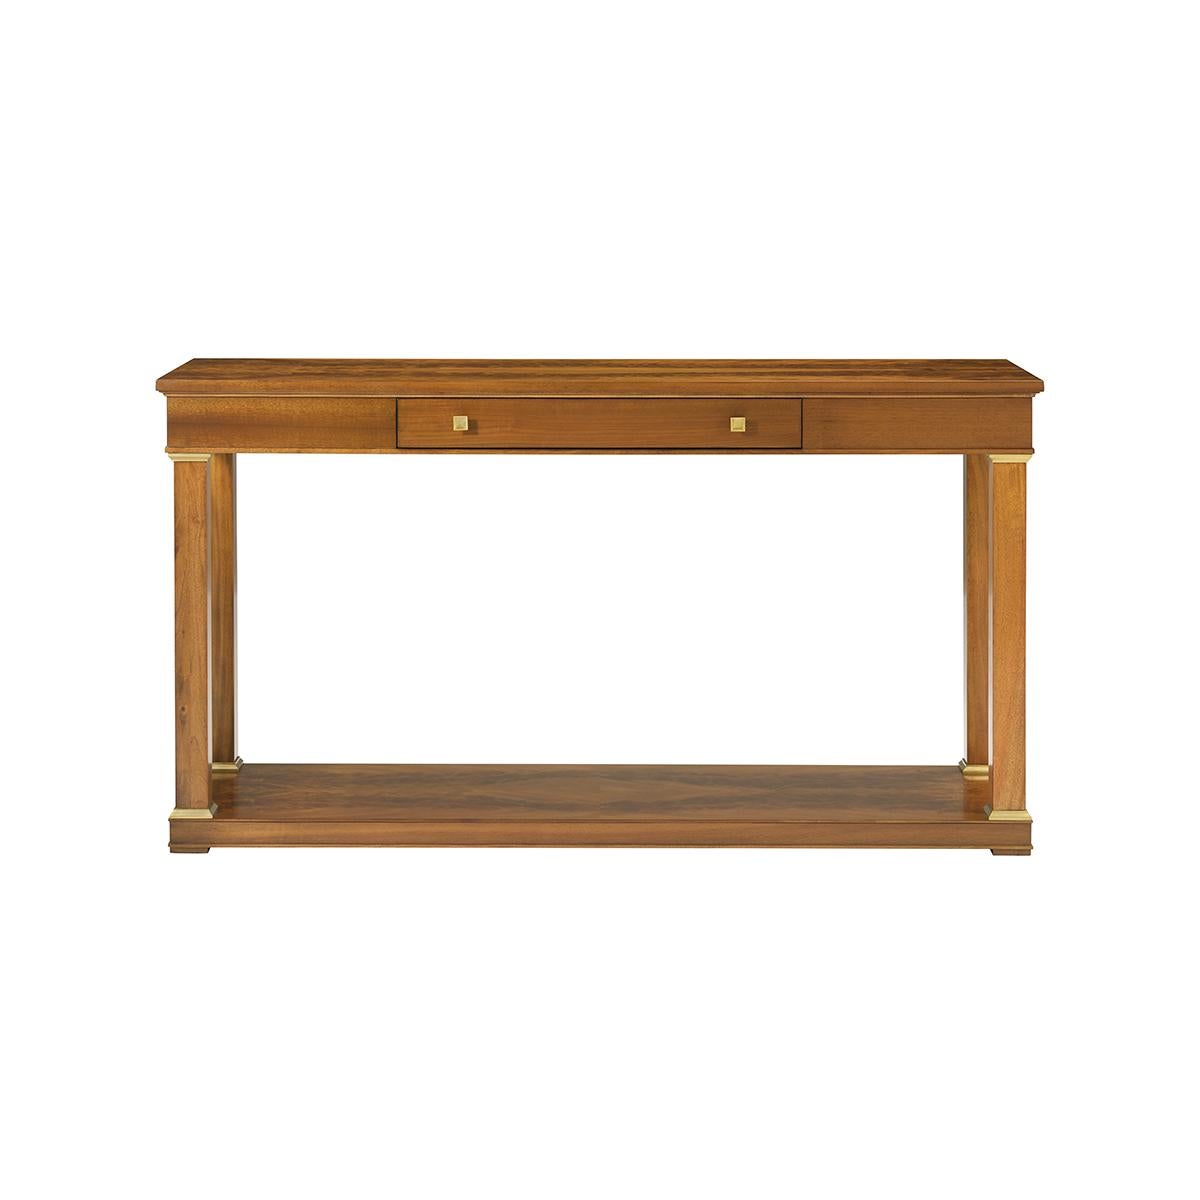 A sophisticated Neoclassical design, with strict pilaster legs with brass trimmings. A veneered top and apron with a drawer sit atop a tall open space meant to accommodate accessories on a veneered lower base.

Dimensions: 60